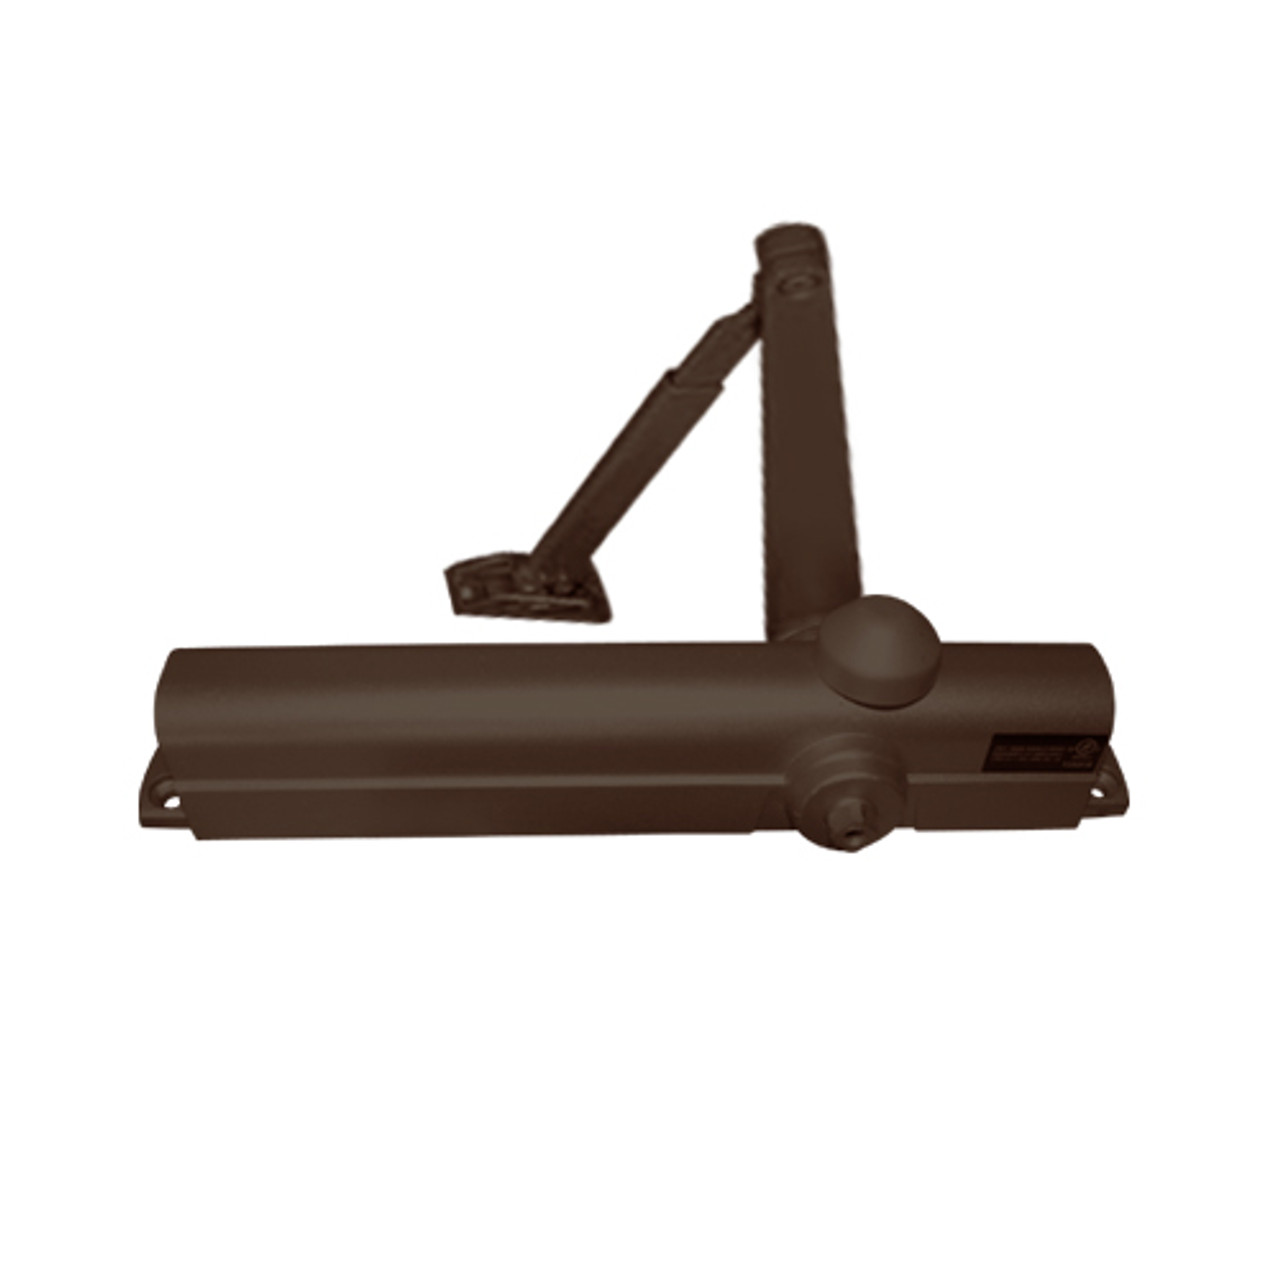 8181-690 Norton 8000 Series Non-Hold Open Door Closers with Regular Low Profile Arm in Statuary Bronze Finish